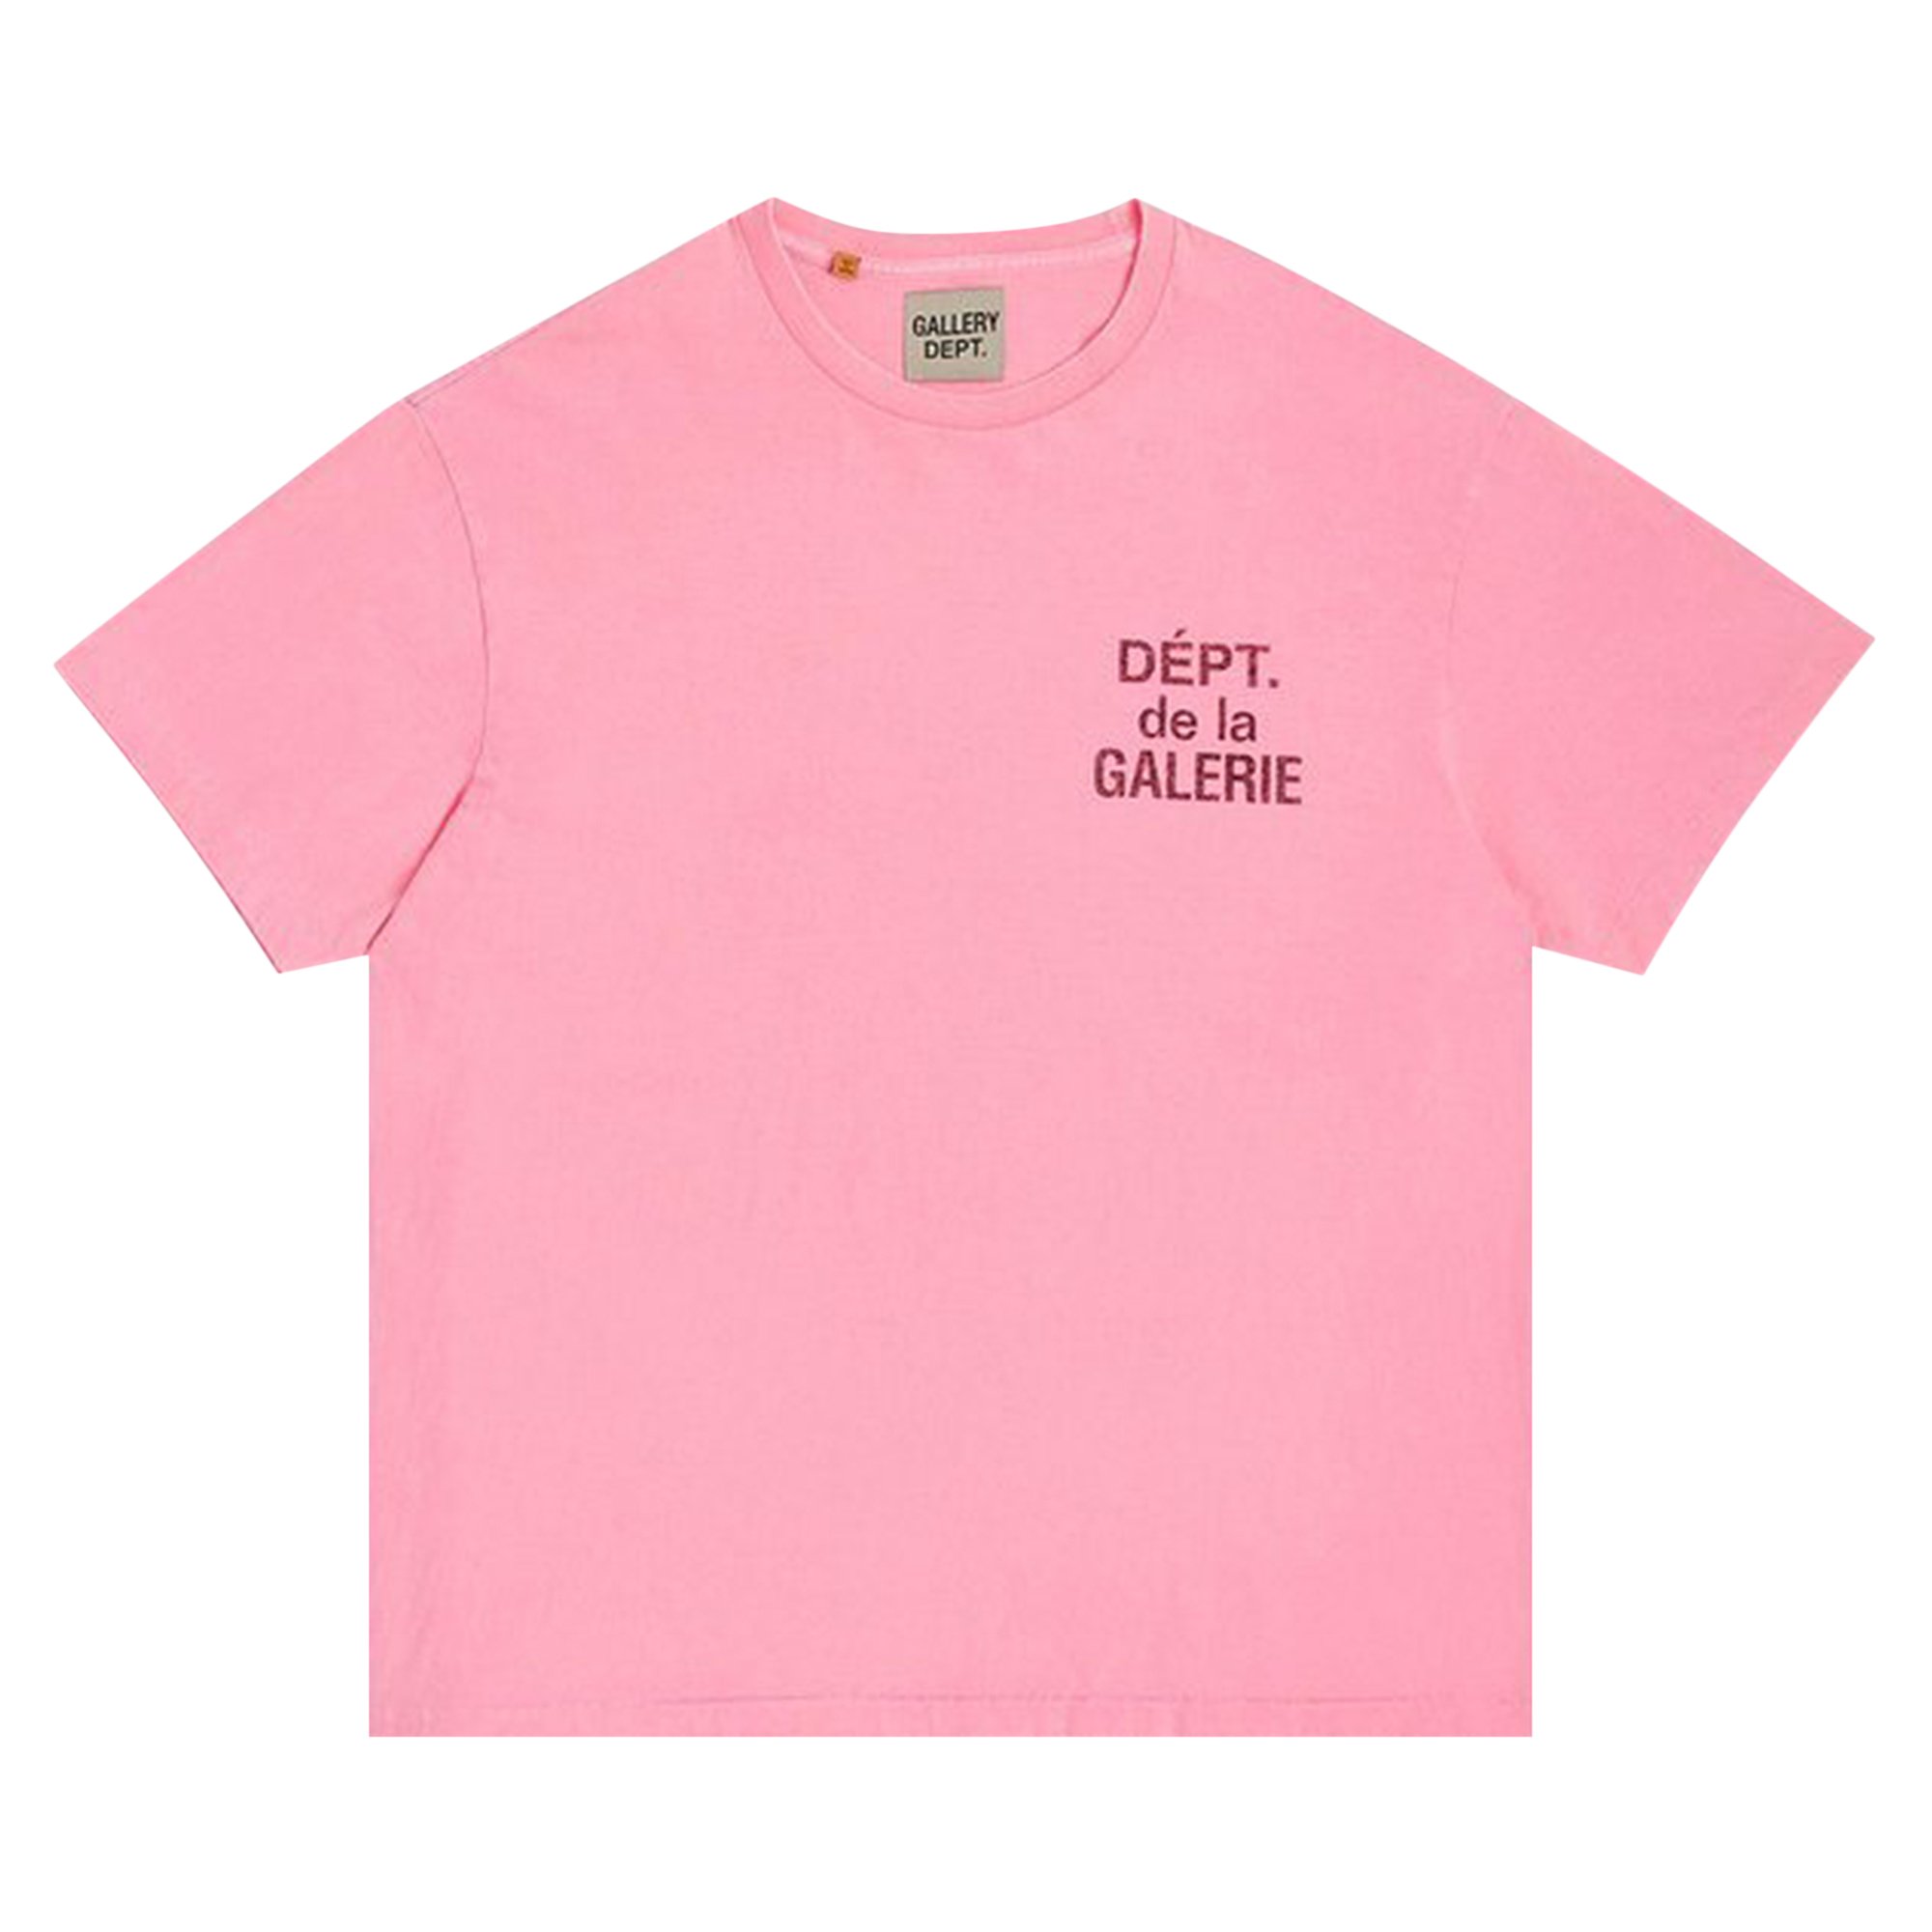 Gallery Dept. French Tee 'Flo Pink'